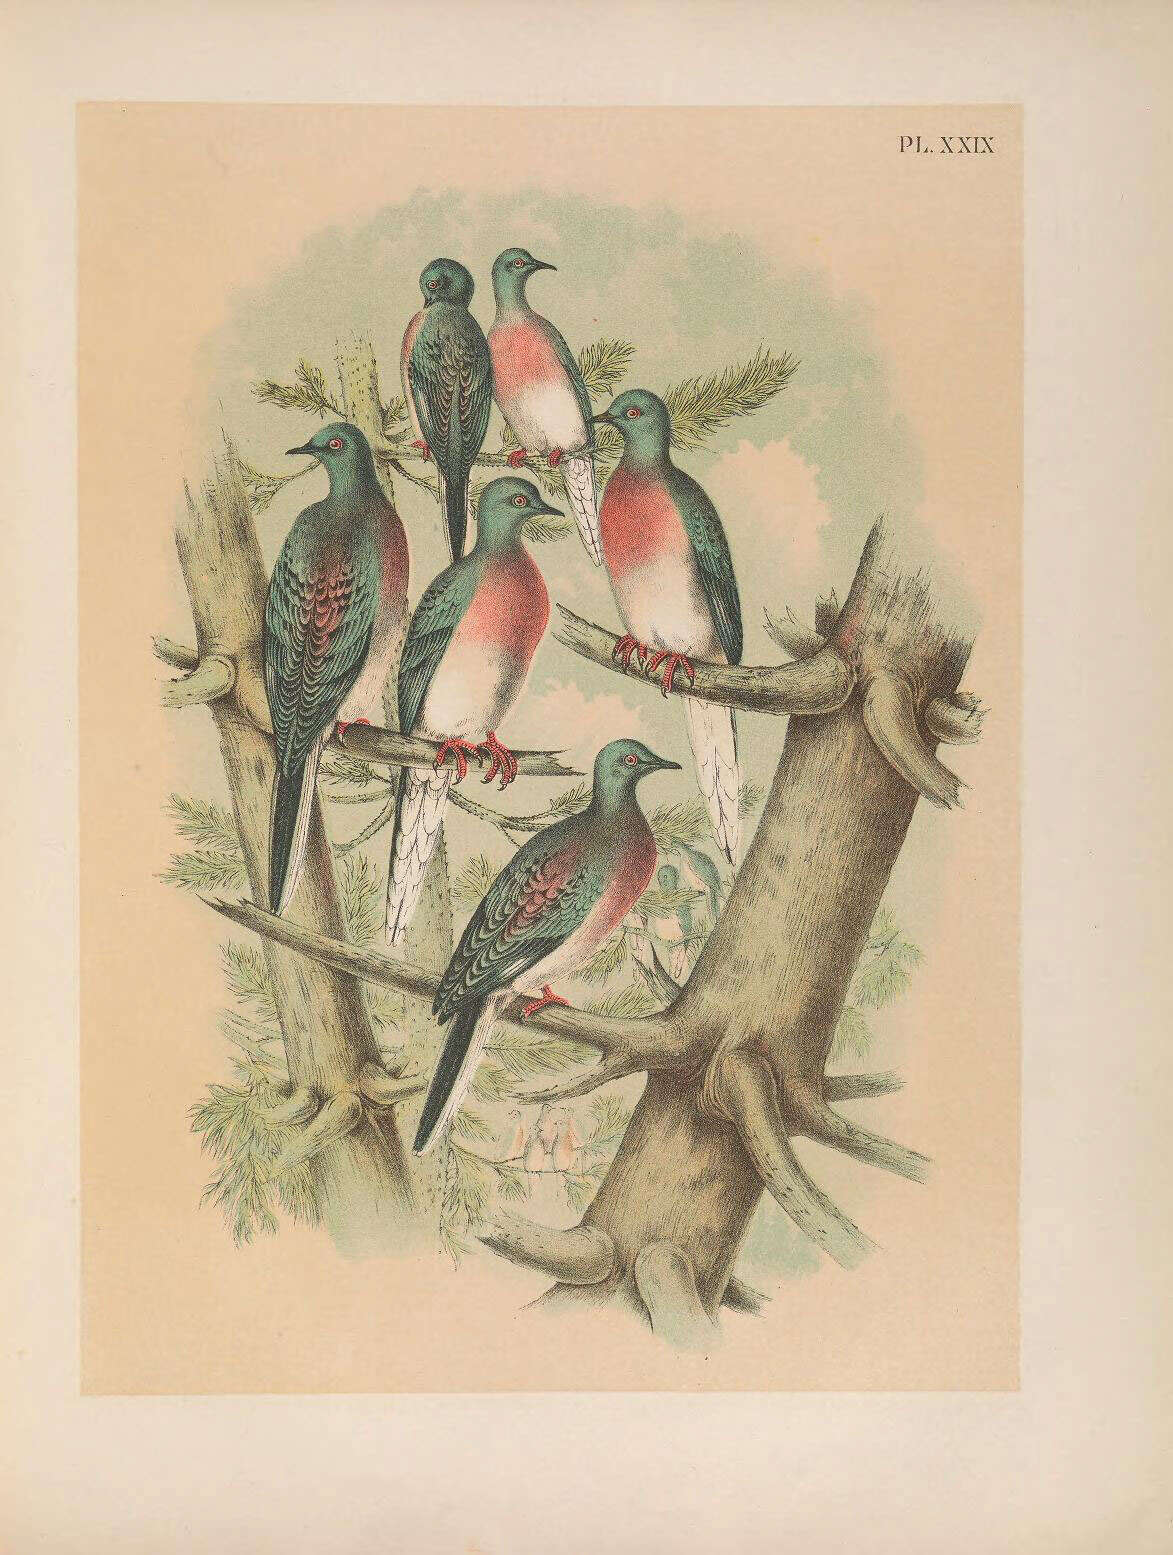 Image of Ectopistes Swainson 1827